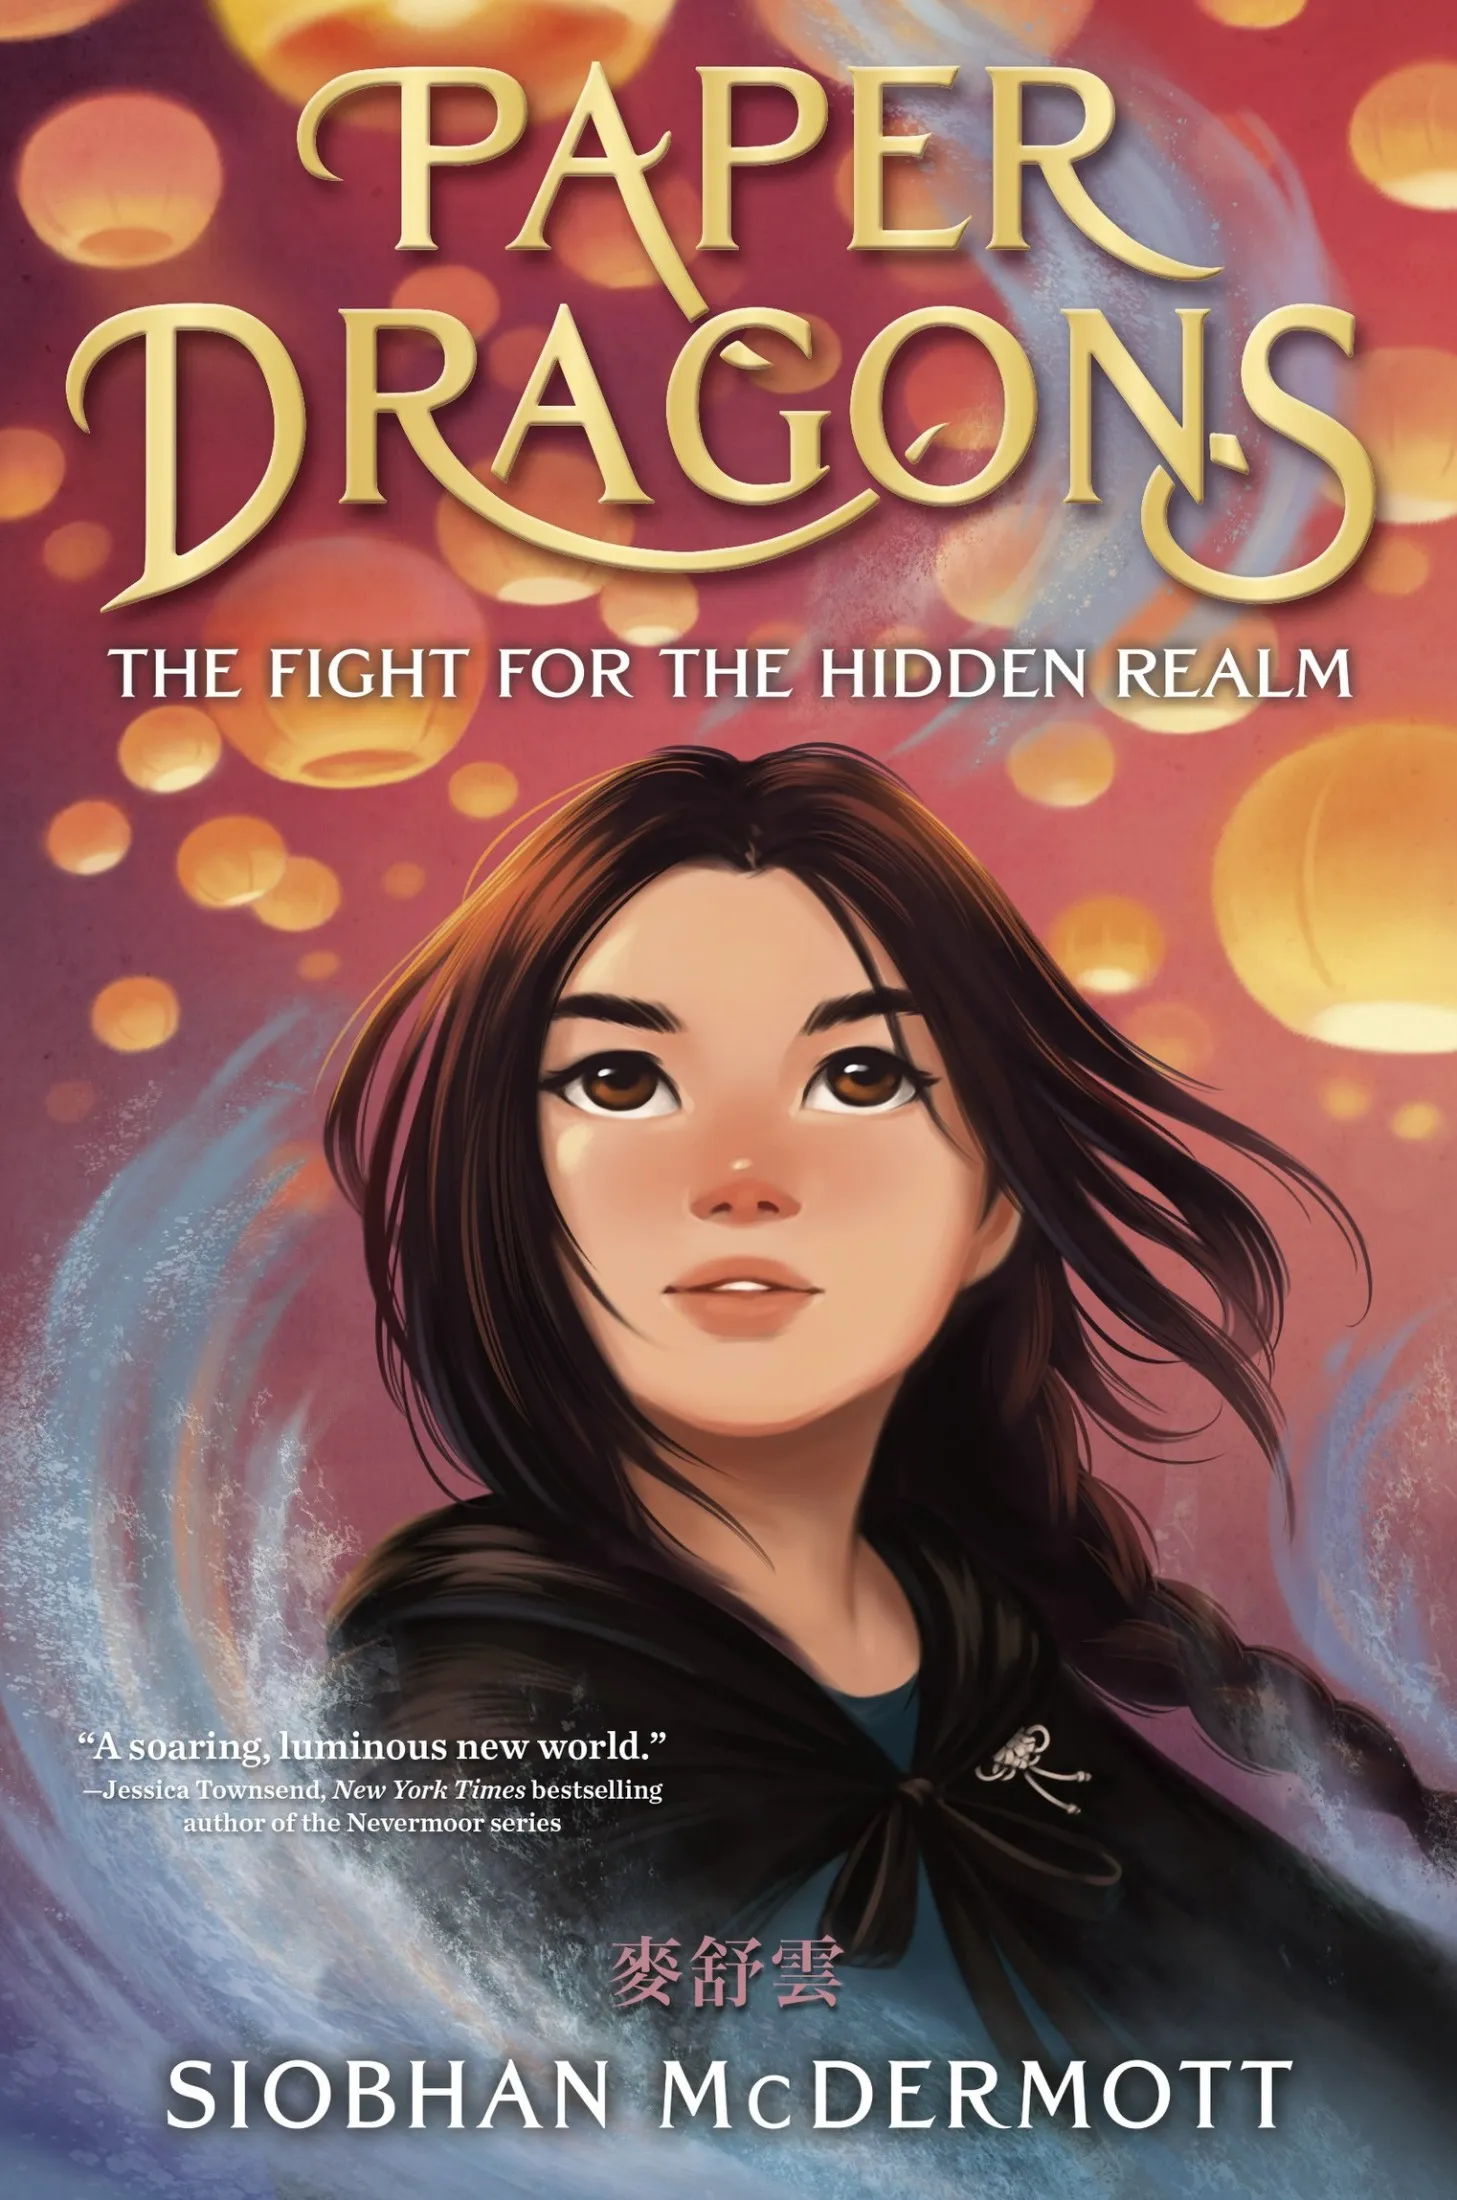 The Fight for the Hidden Realm (Paper Dragons #1)